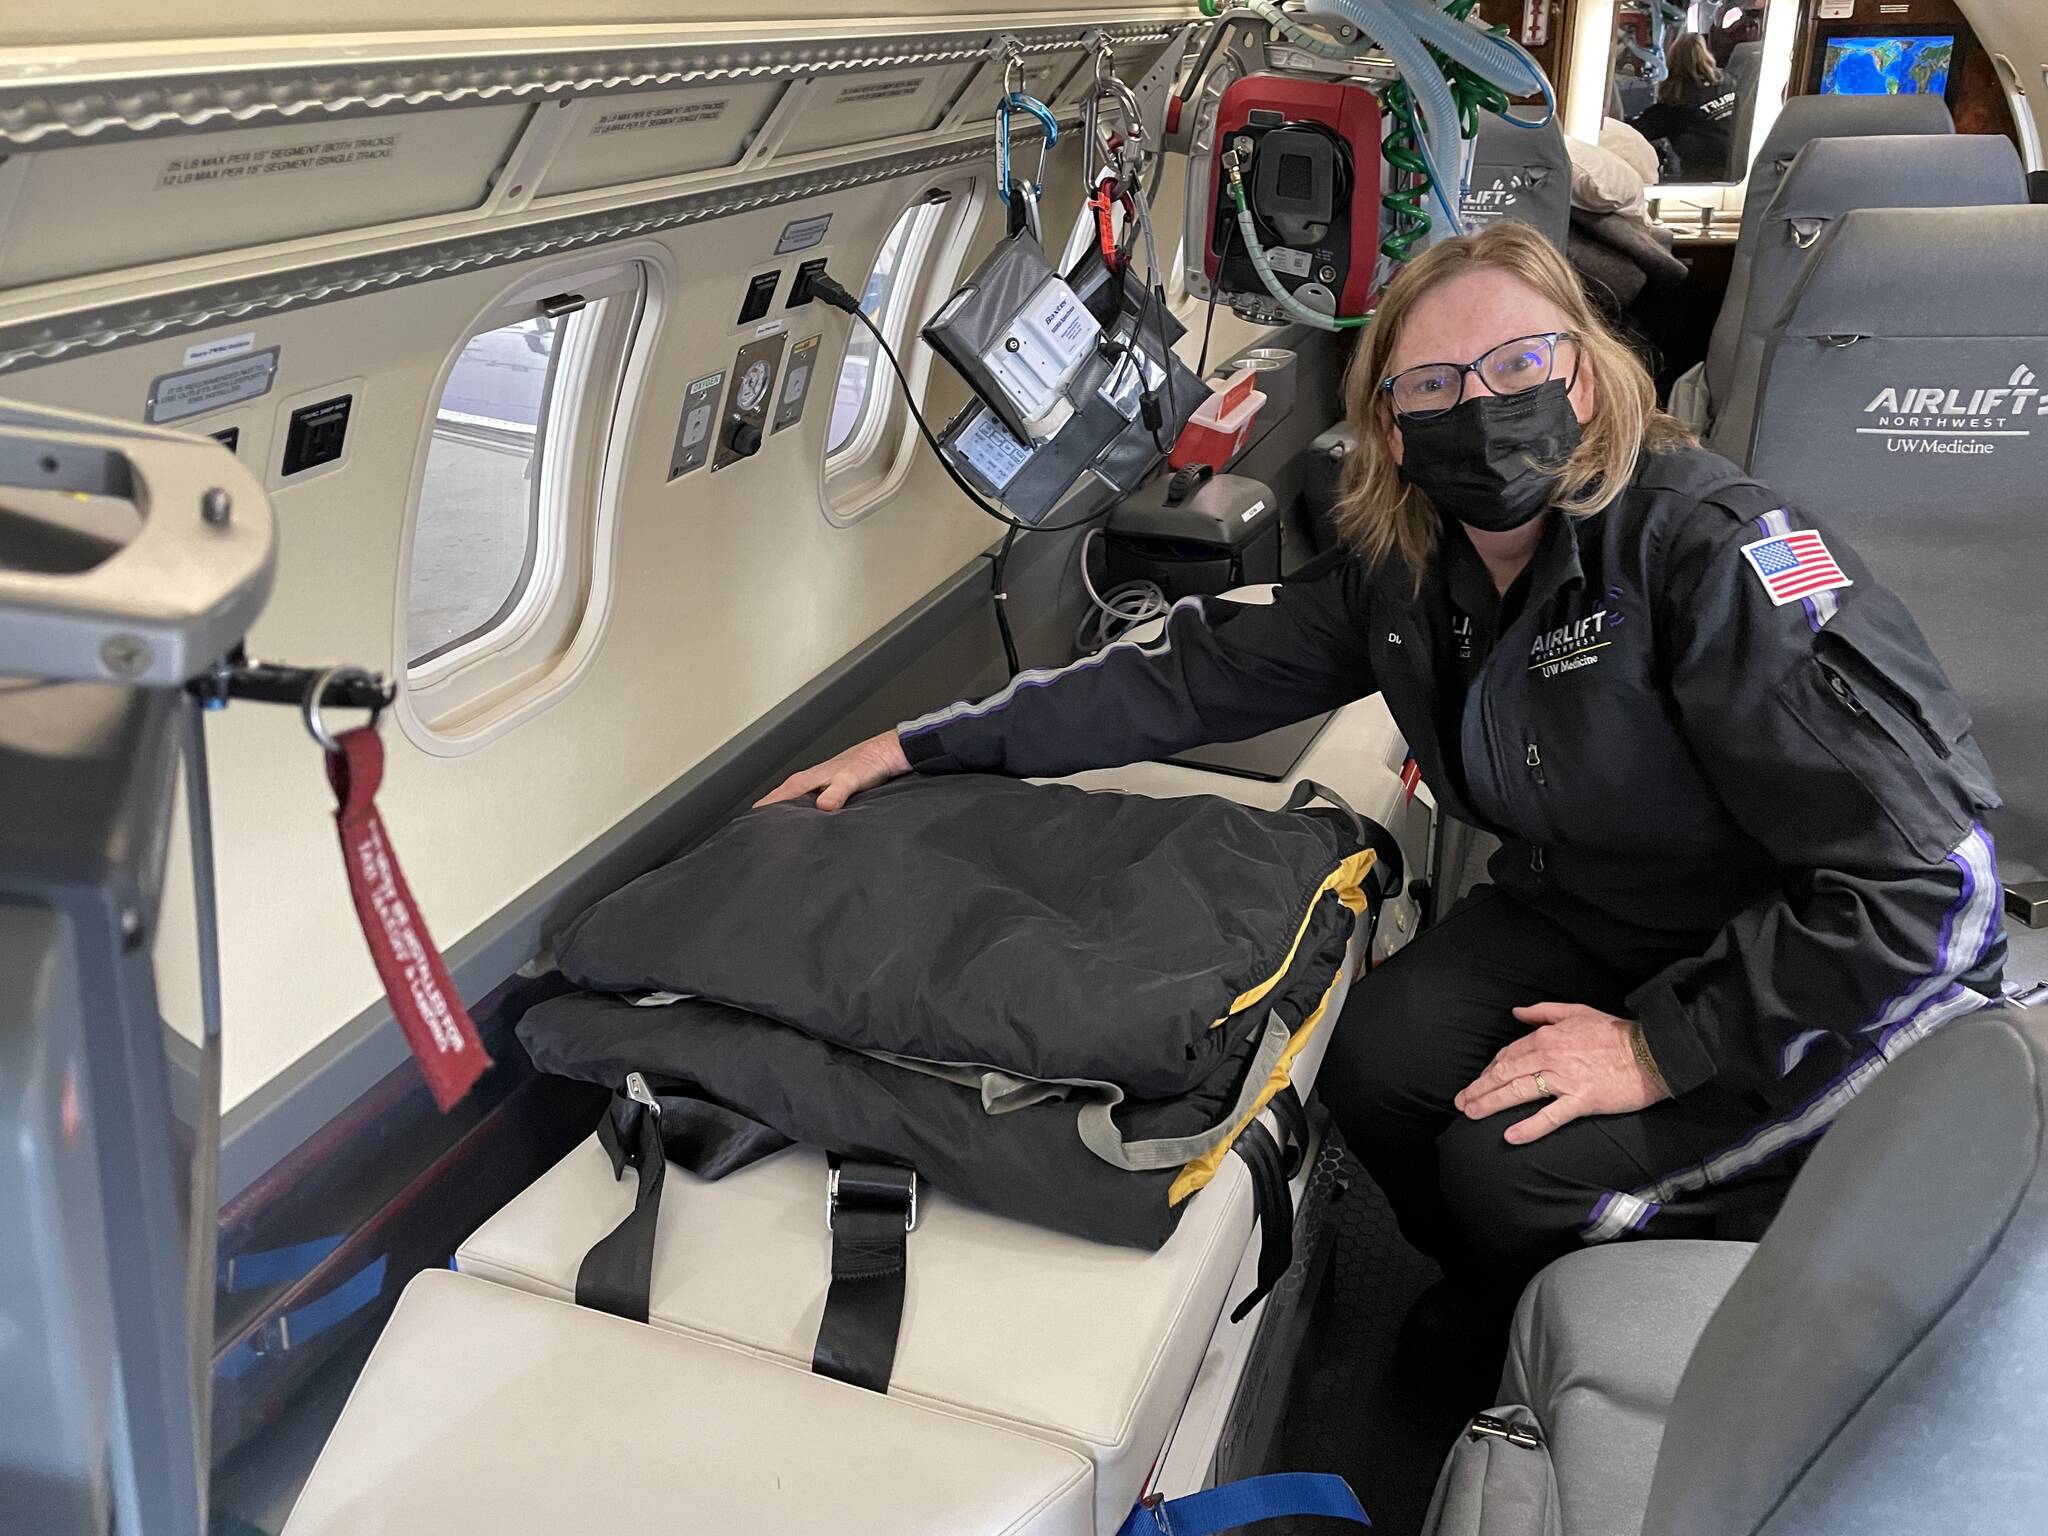 Michael S. Lockett / Juneau Empire 
Airlift Northwest flight nurse Diana Paul shows off some of the improved patient care features of the medevac organization’s new Learjet 45XR aircraft, recently arrived in Juneau for service around the Southeast, on Sept. 30, 2021.